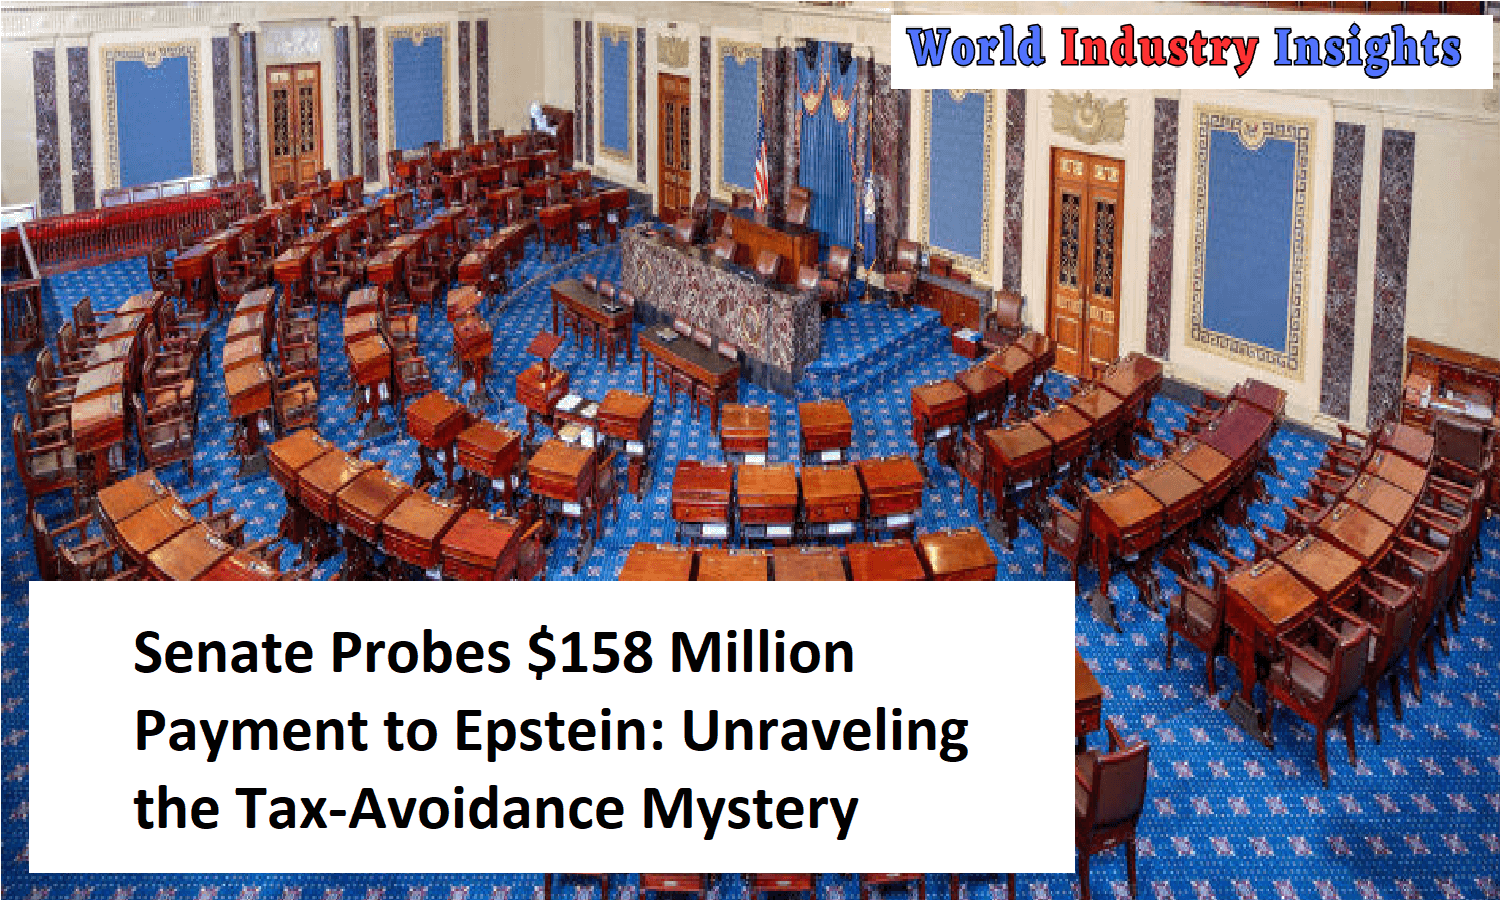 Senate Probes $158 Million Payment to Epstein Unraveling the Tax-Avoidance Mystery